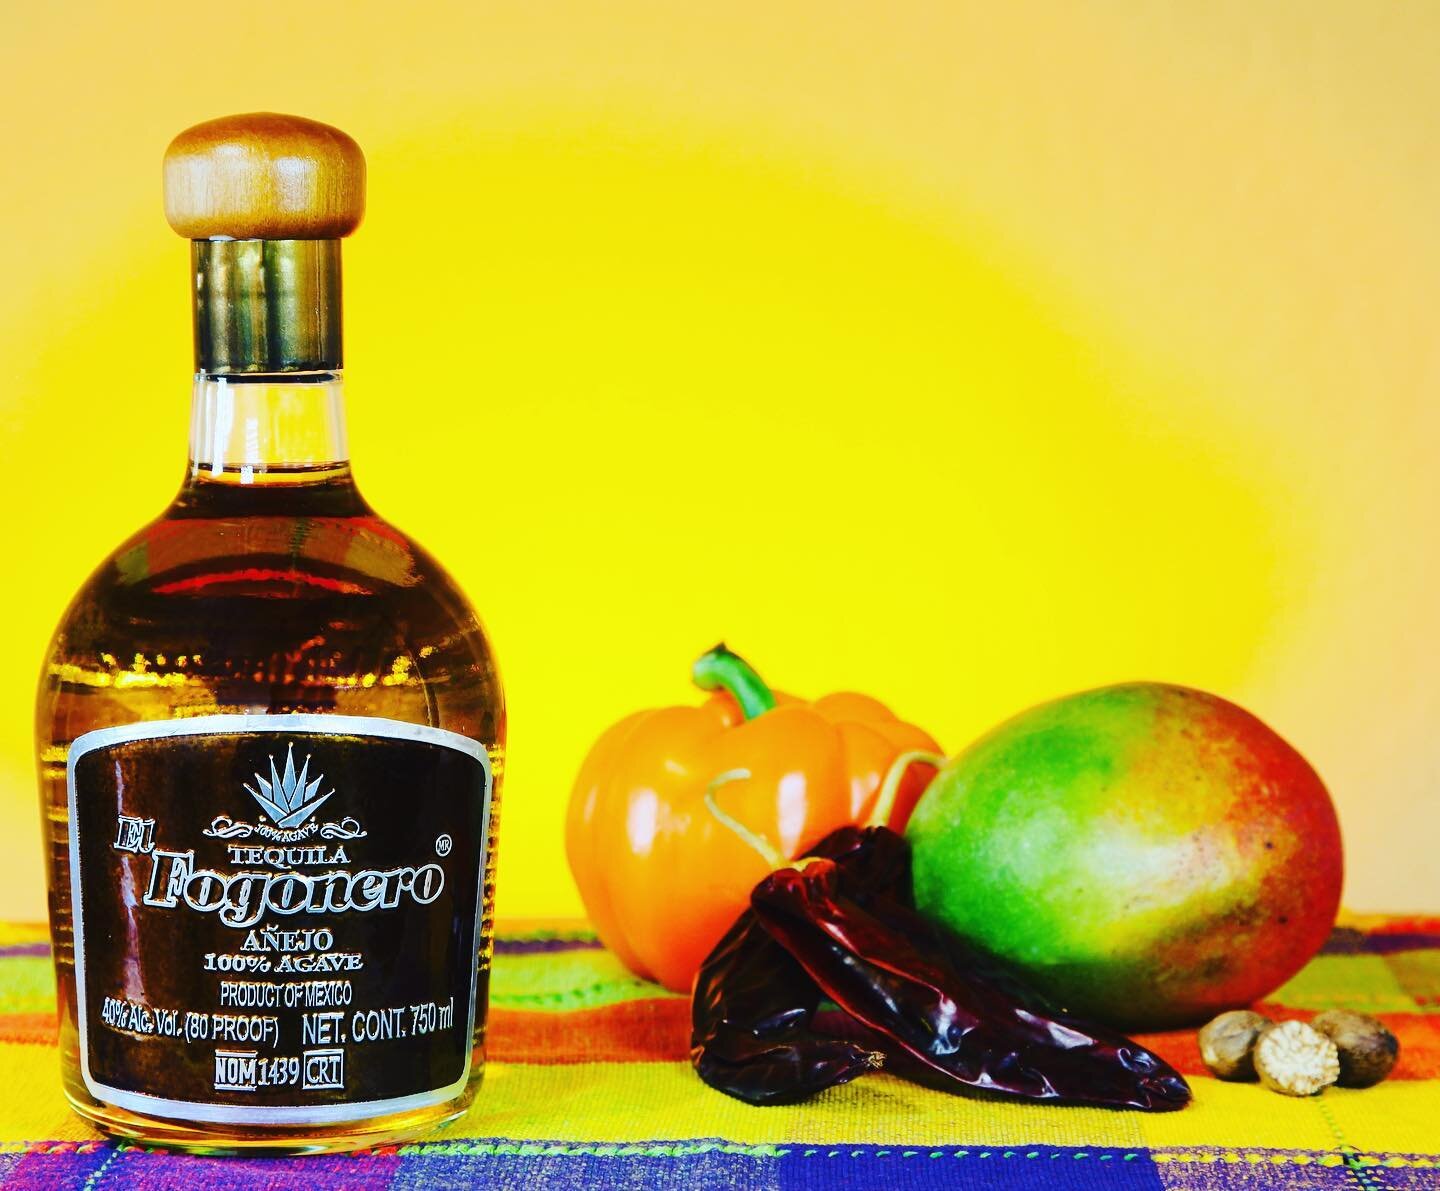 El Fogonero&rsquo;s anejo tequila is aged to perfection for 18 months in charred whiskey barrels with tasting notes of papaya, warm oak, and dark chocolate👌🏽❤️🇲🇽 Available at RALEYS Markets #thebesttequila #sipdontshoot #anejo #raleys #oakandagav